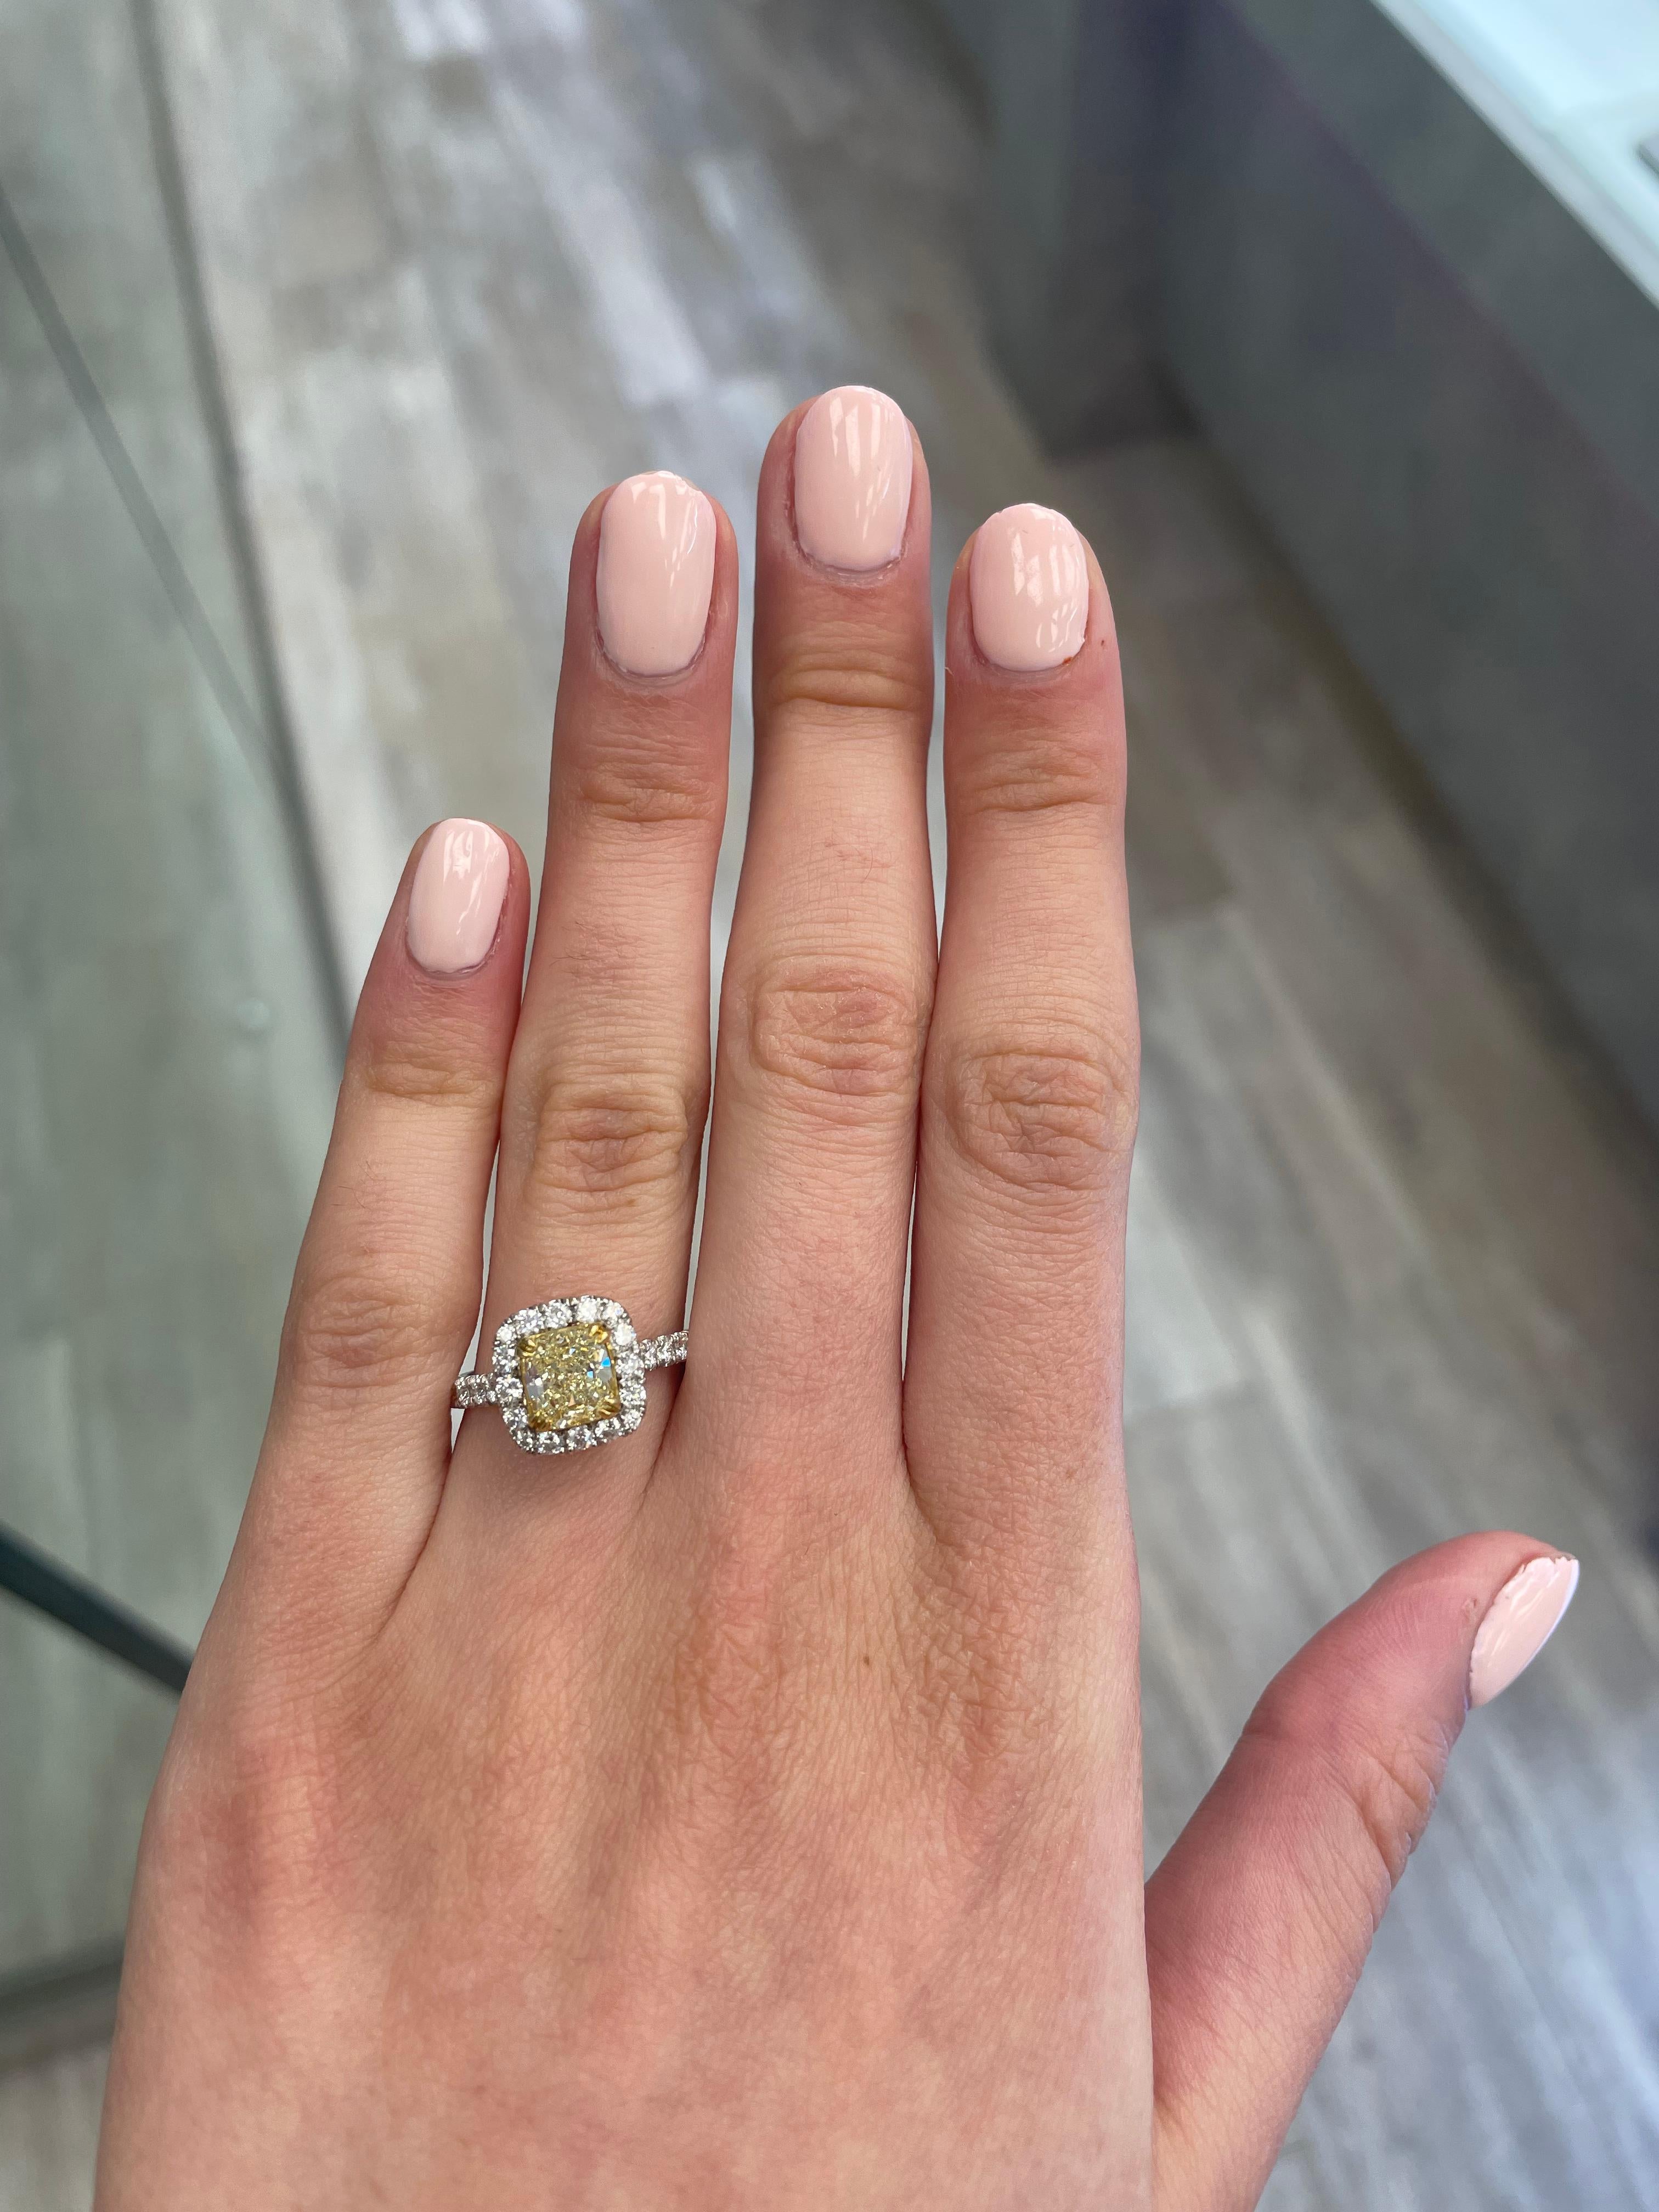 Stunning modern EGL certified yellow diamond with halo ring, two-tone 18k yellow and white gold. By Alexander Beverly Hills
2.33 carats total diamond weight.
1.27 carat cushion cut Fancy Yellow color and VS1 clarity diamond, EGL graded. Complimented